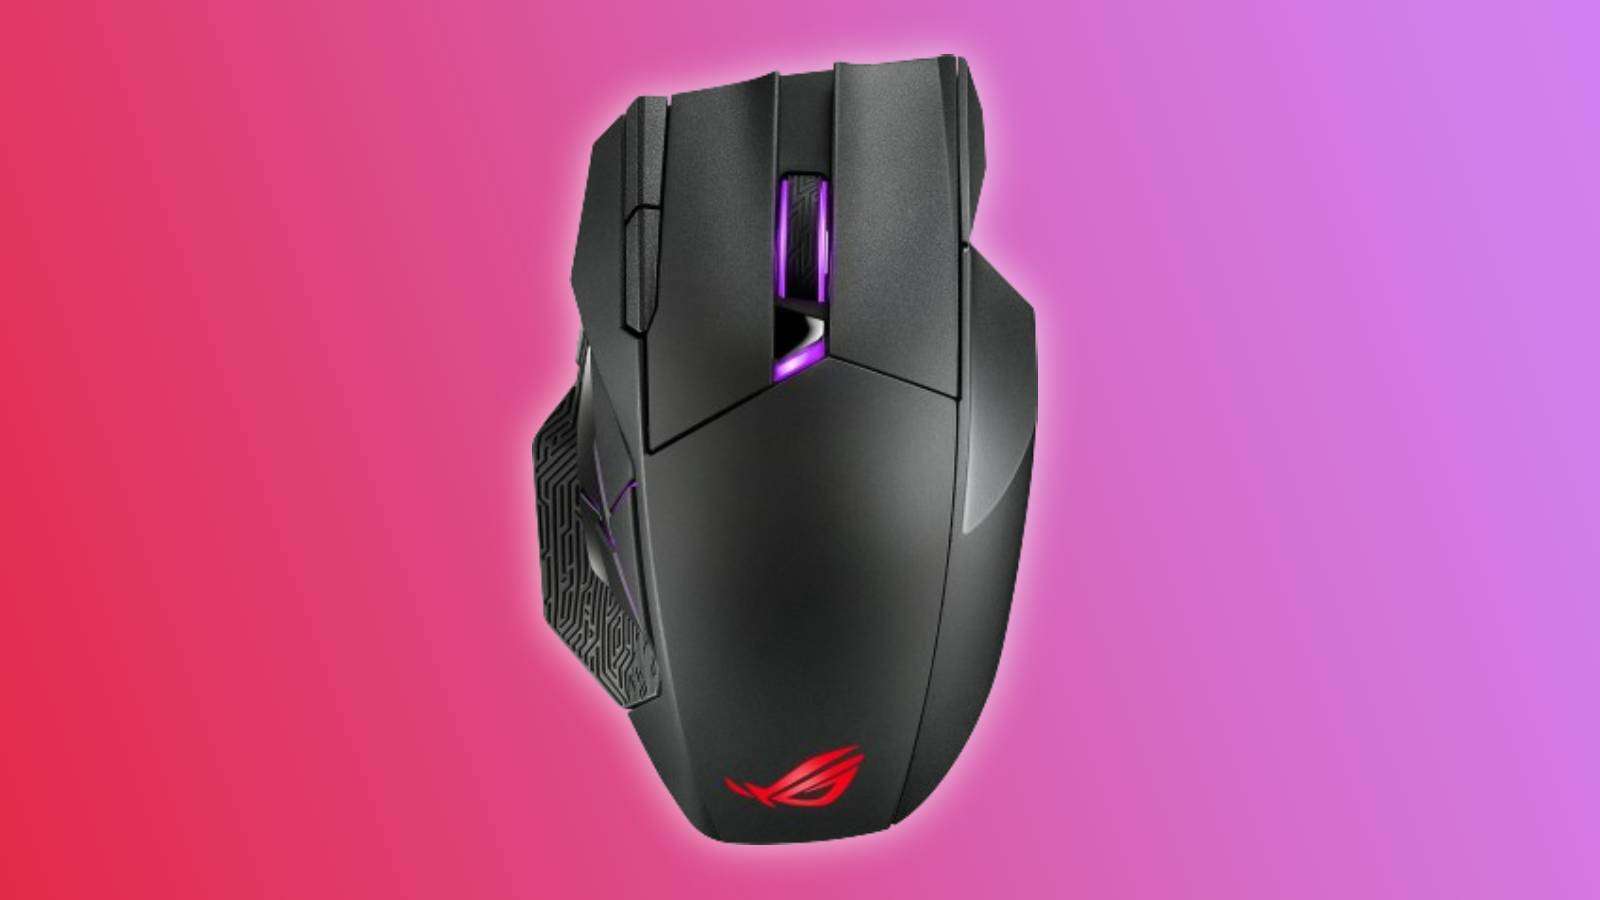 Iamge of the ASUS ROG Spatha X Wireless Gaming Mouse.